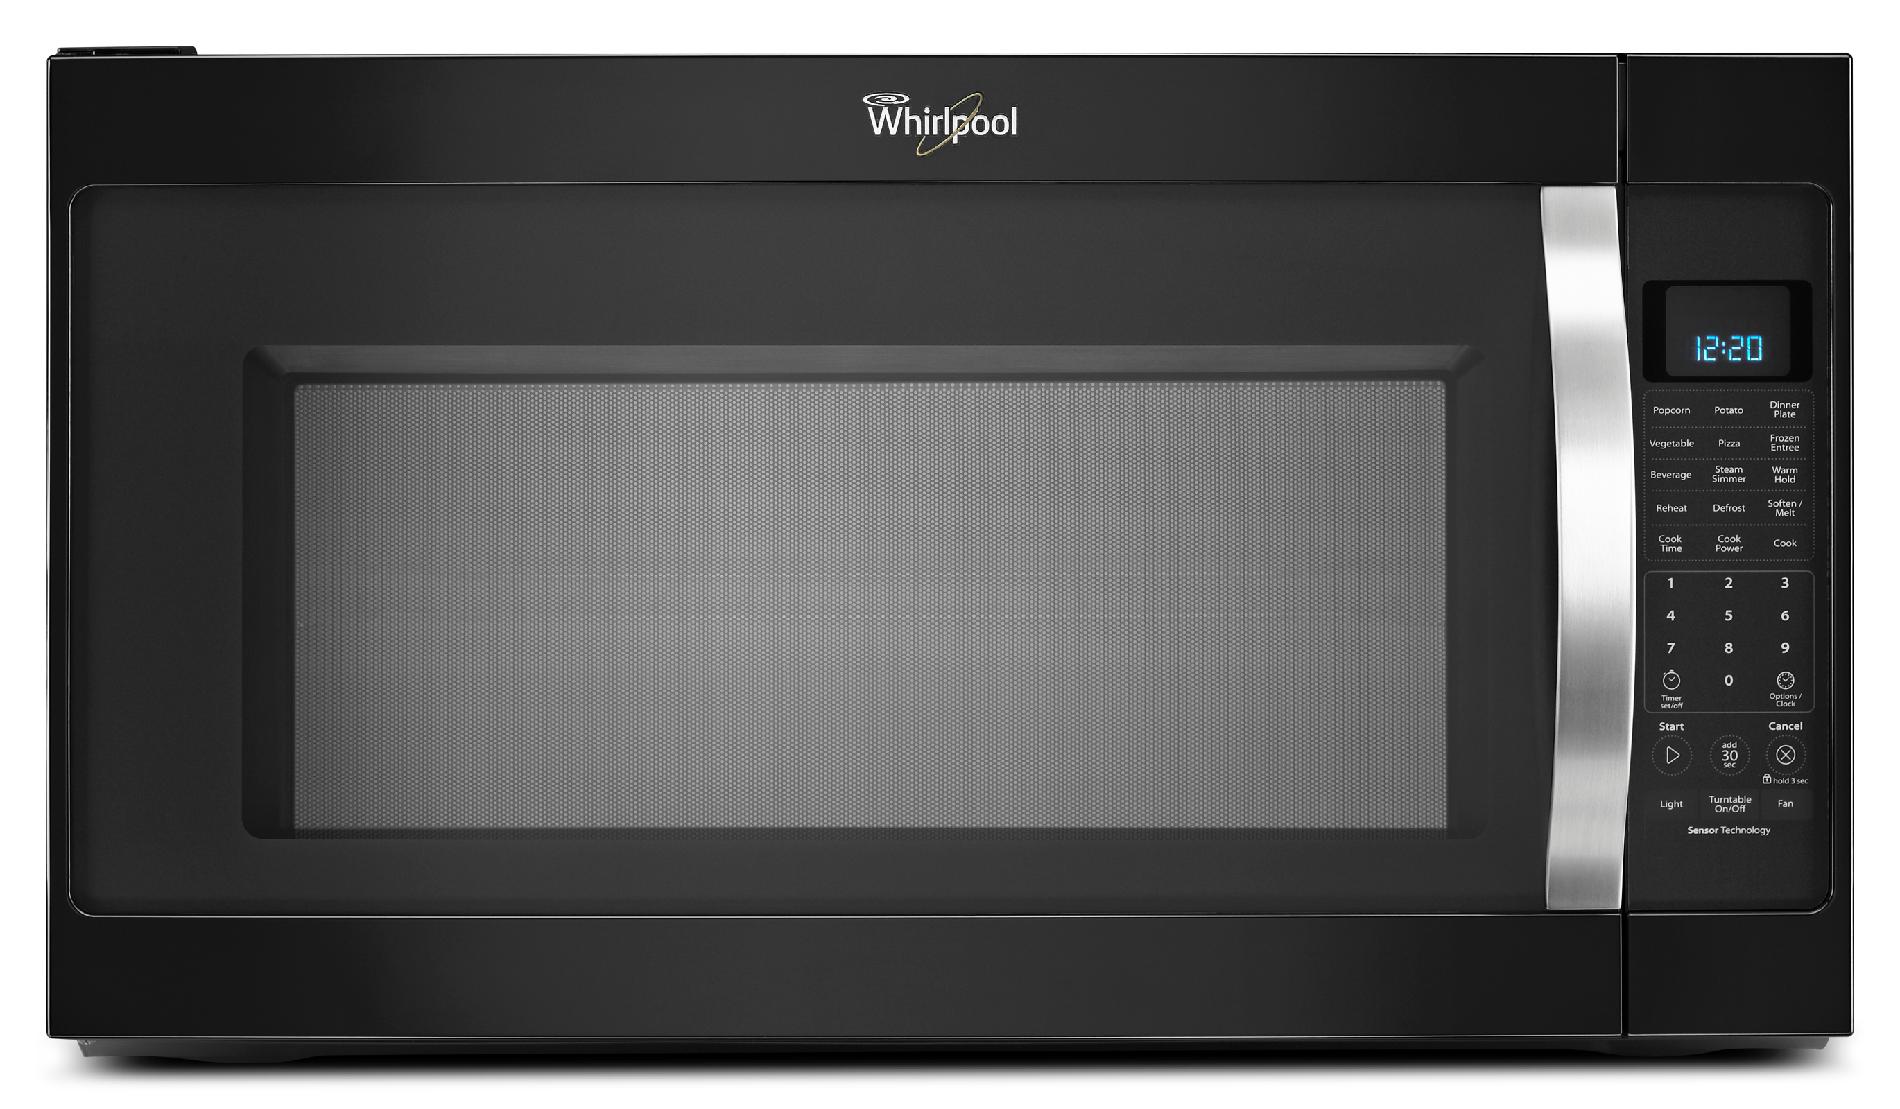 Whirlpool 2.0 cu. ft. Over-the-Range Microwave Non-Stick Interior